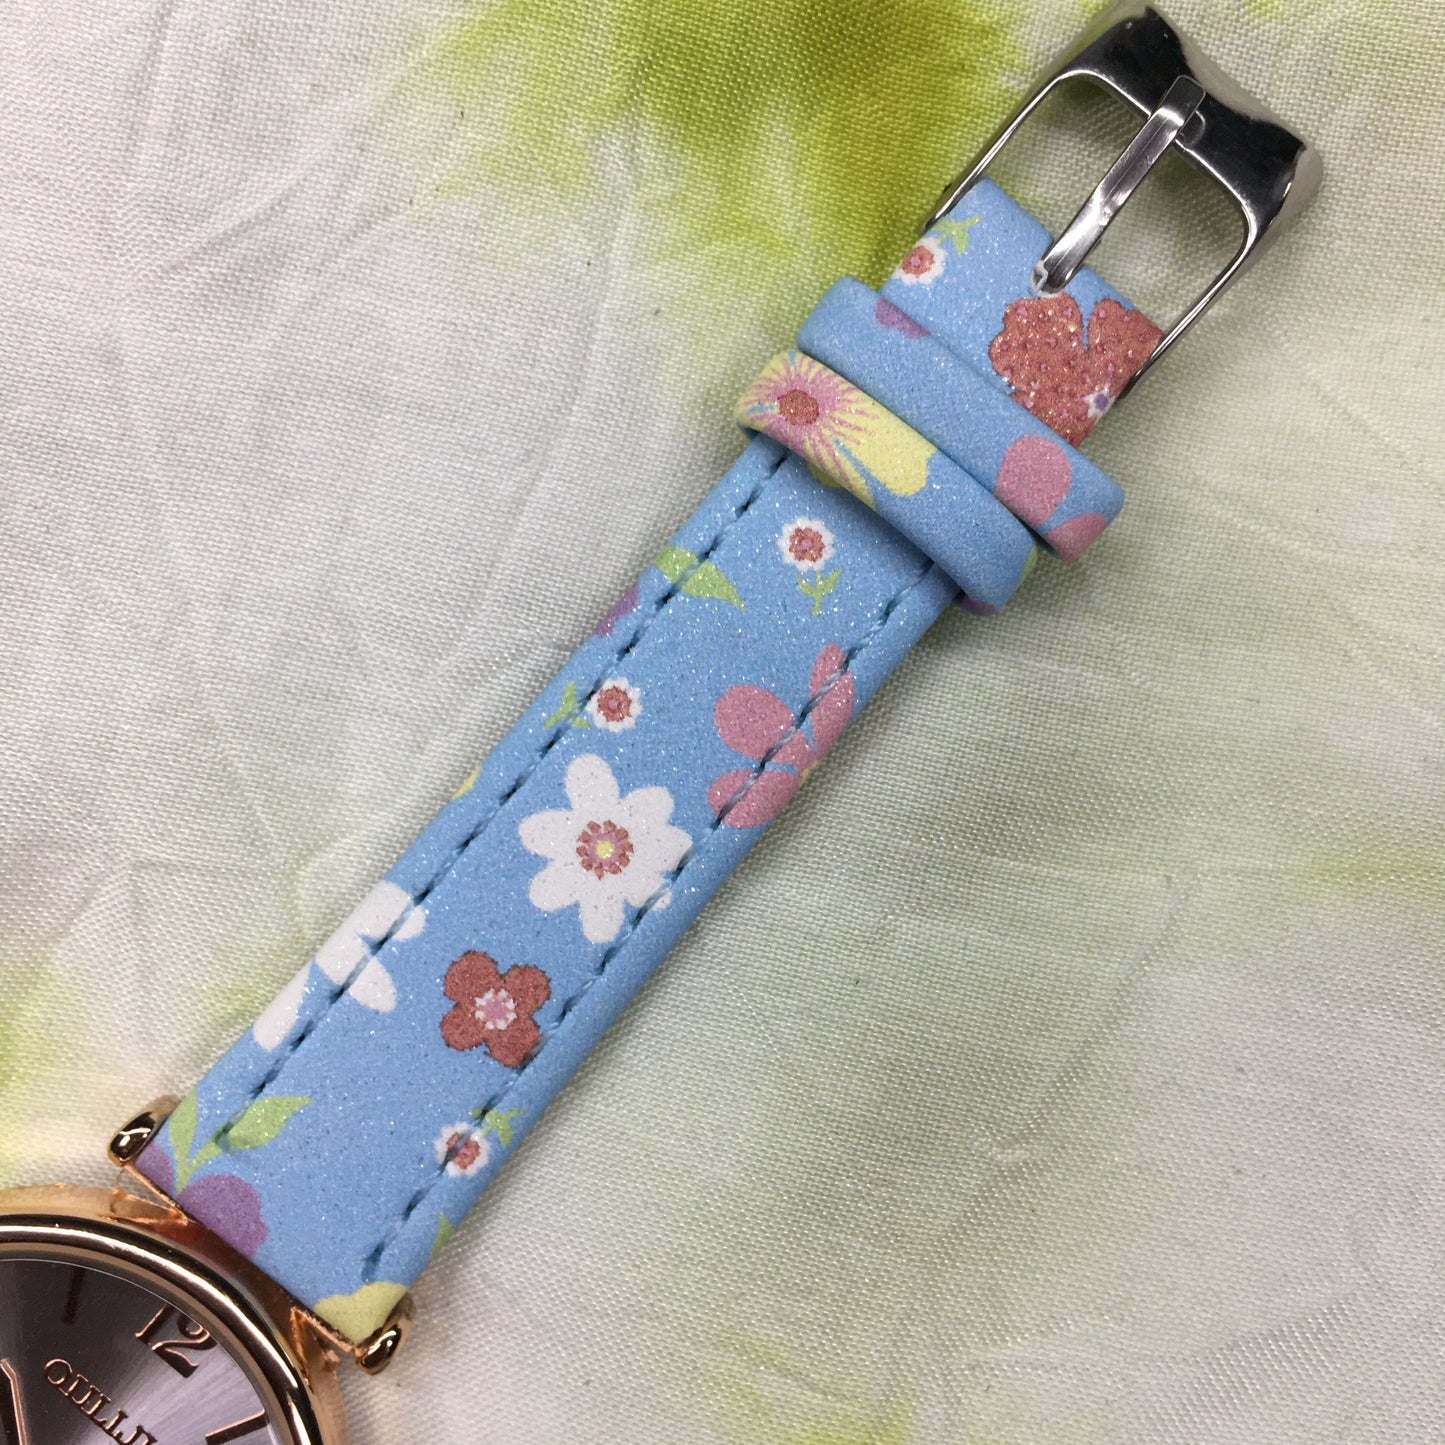 Trendy & Cute Watch for her - Dno - 16